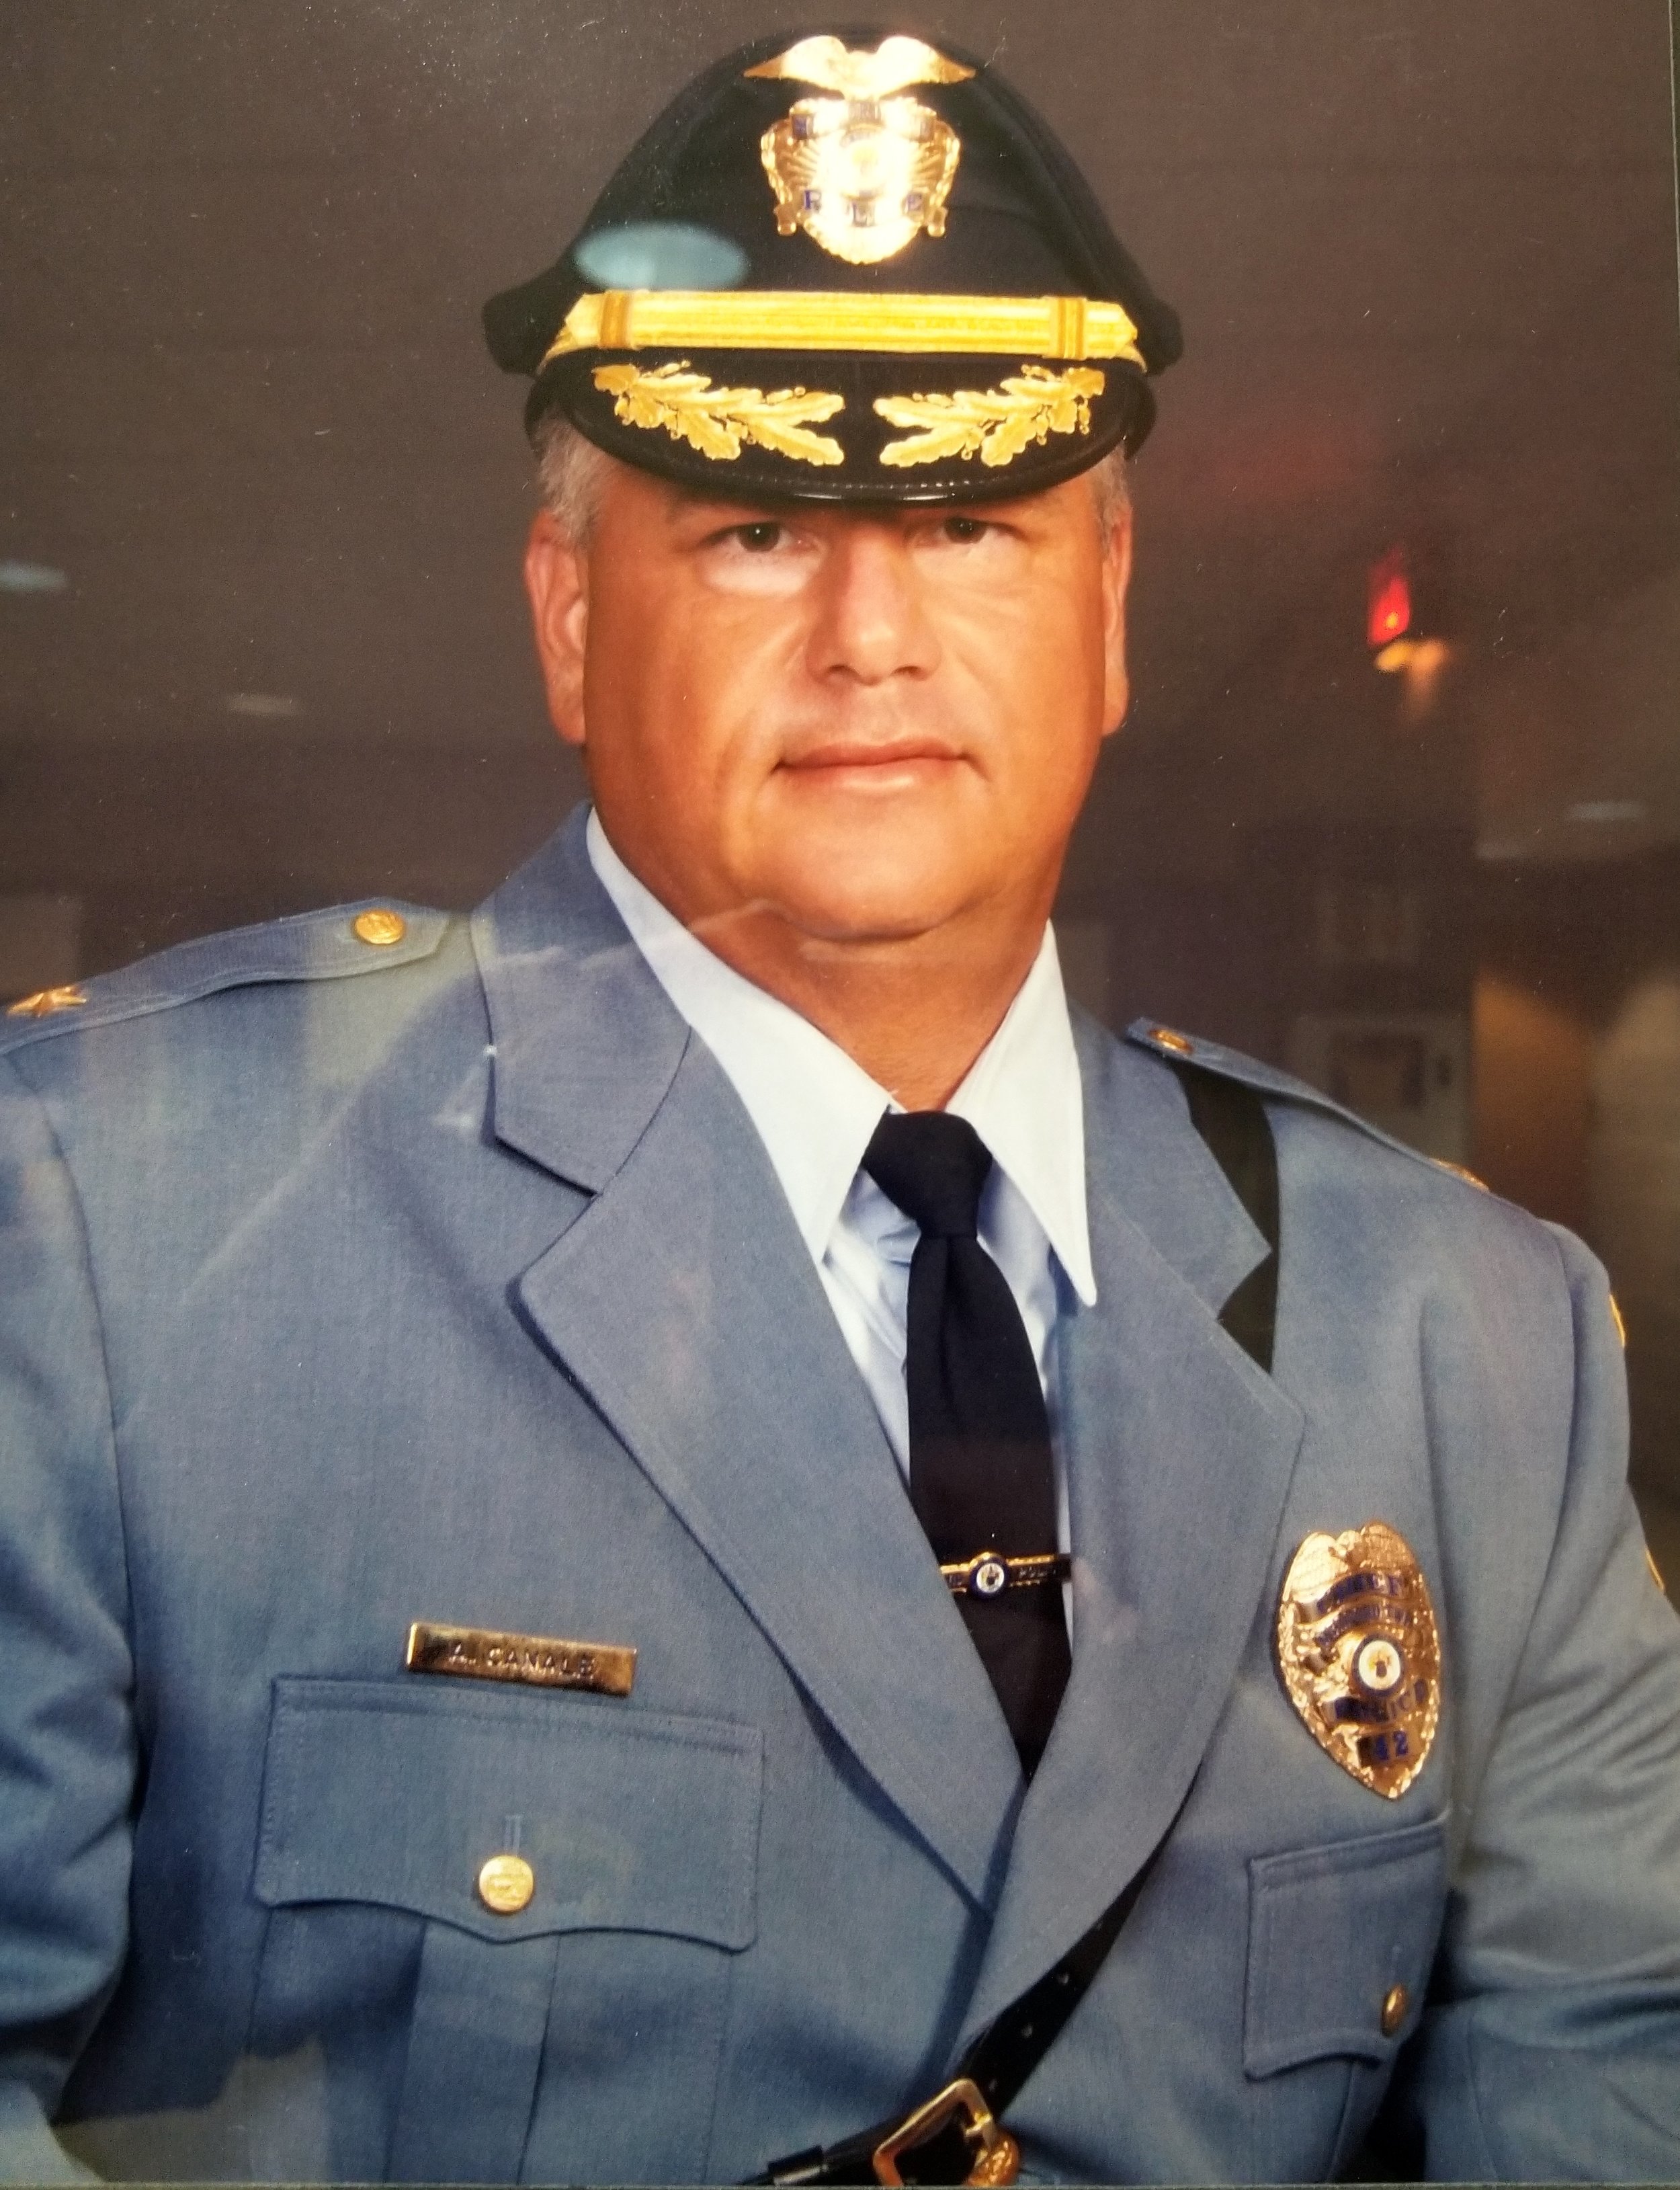 Chief Anthony Canale #2542